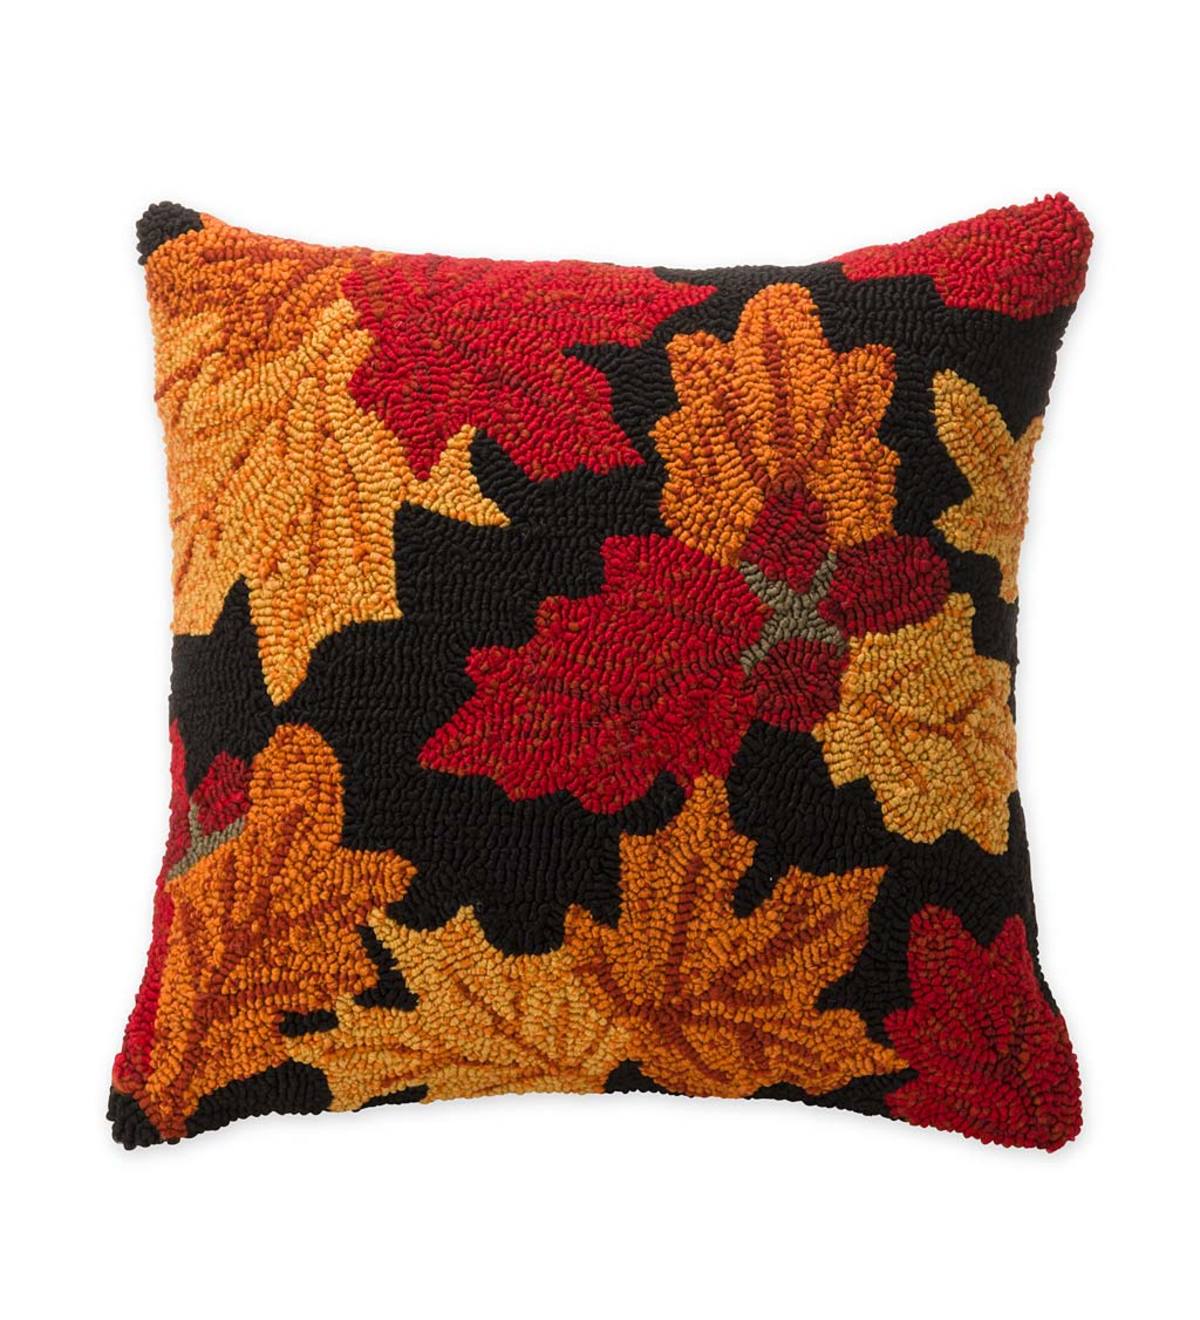 Indoor/Outdoor Falling Leaves Hooked Polypropylene Throw Pillow